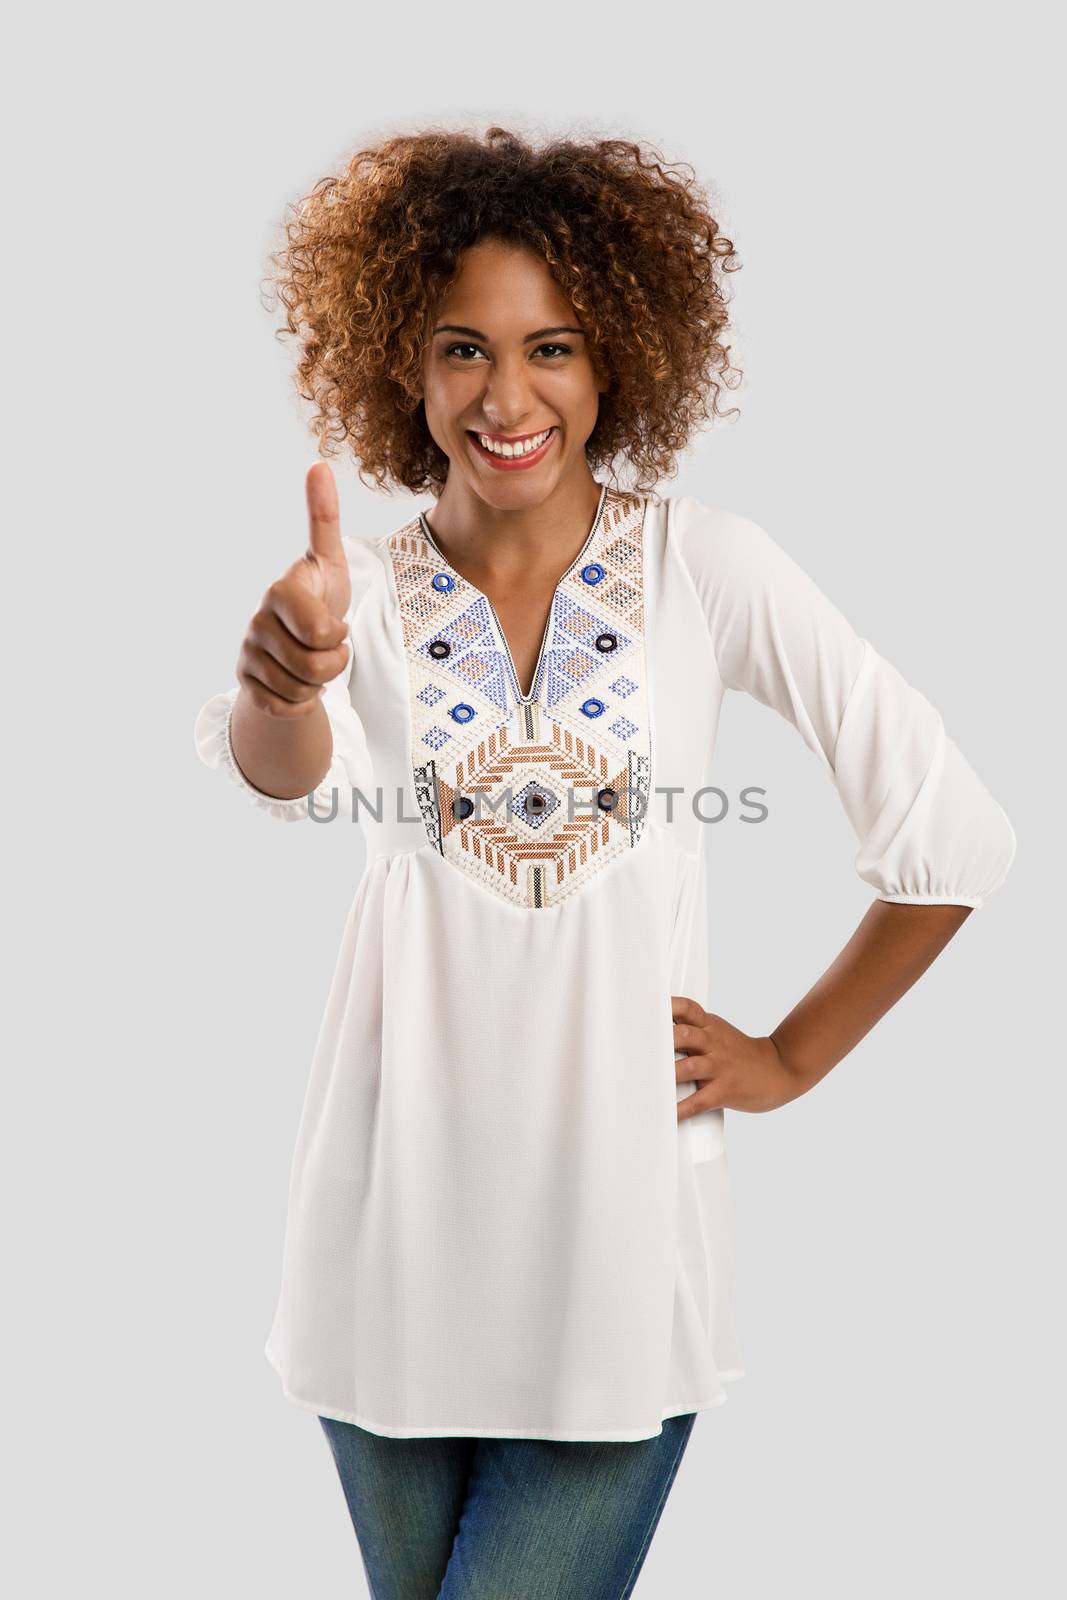 Beautiful African American woman with a thumbs up